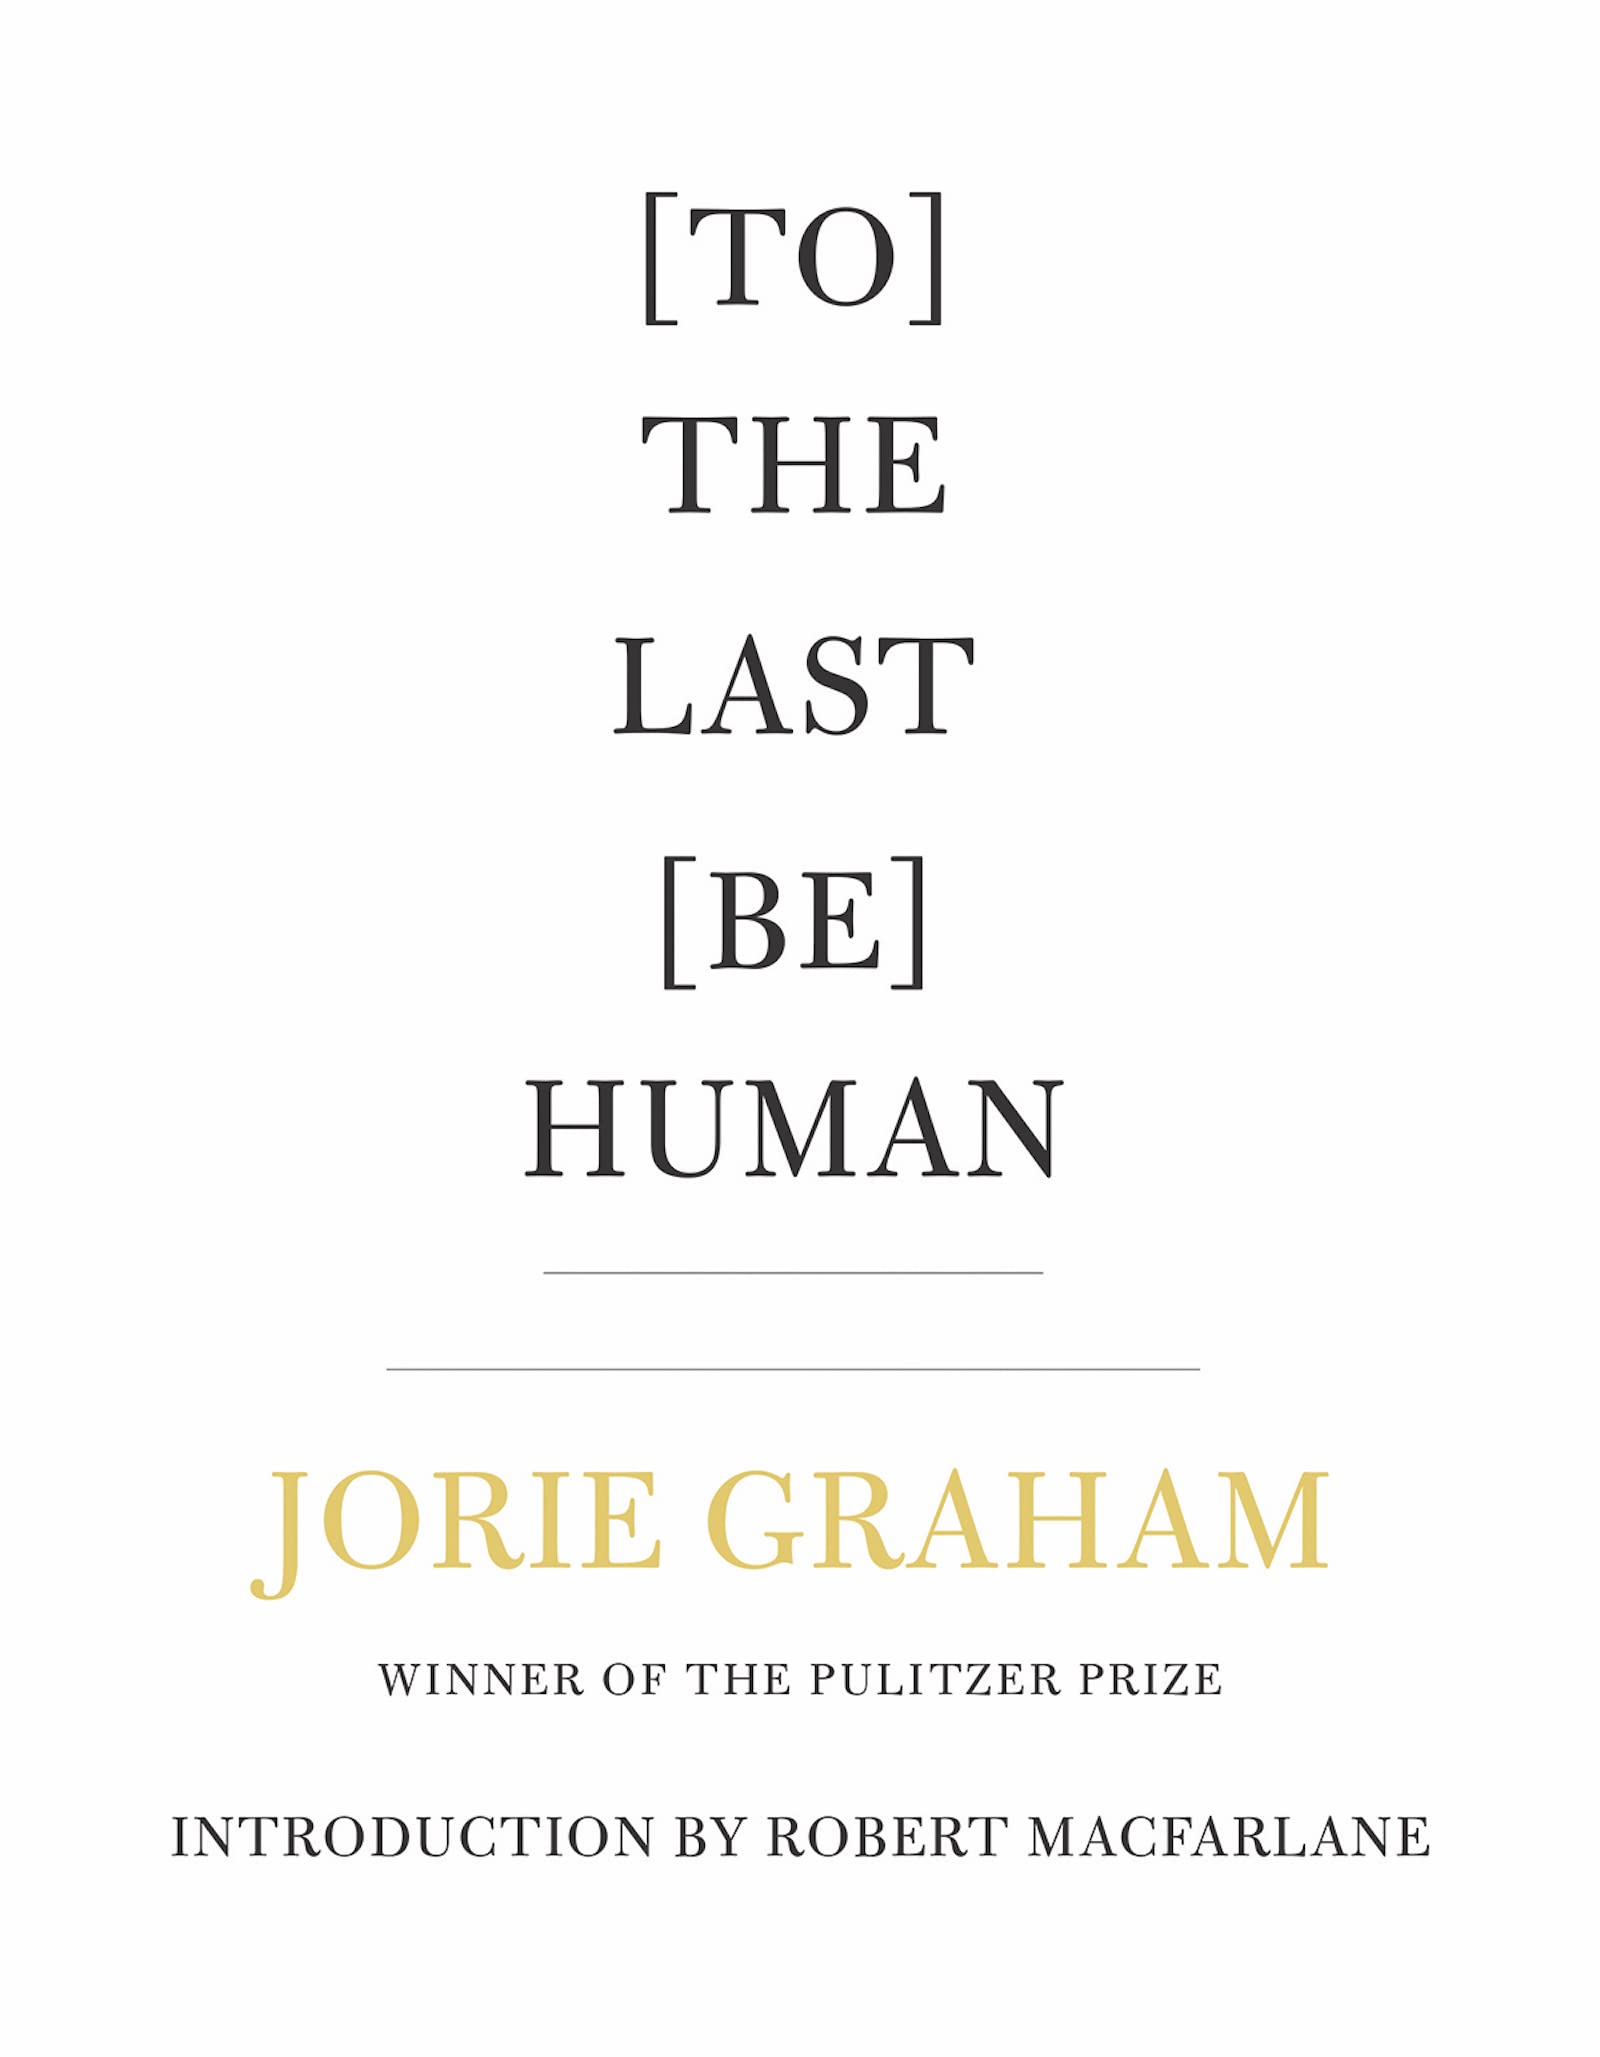 Book Cover Image of “[To] The Last [Be] Human”